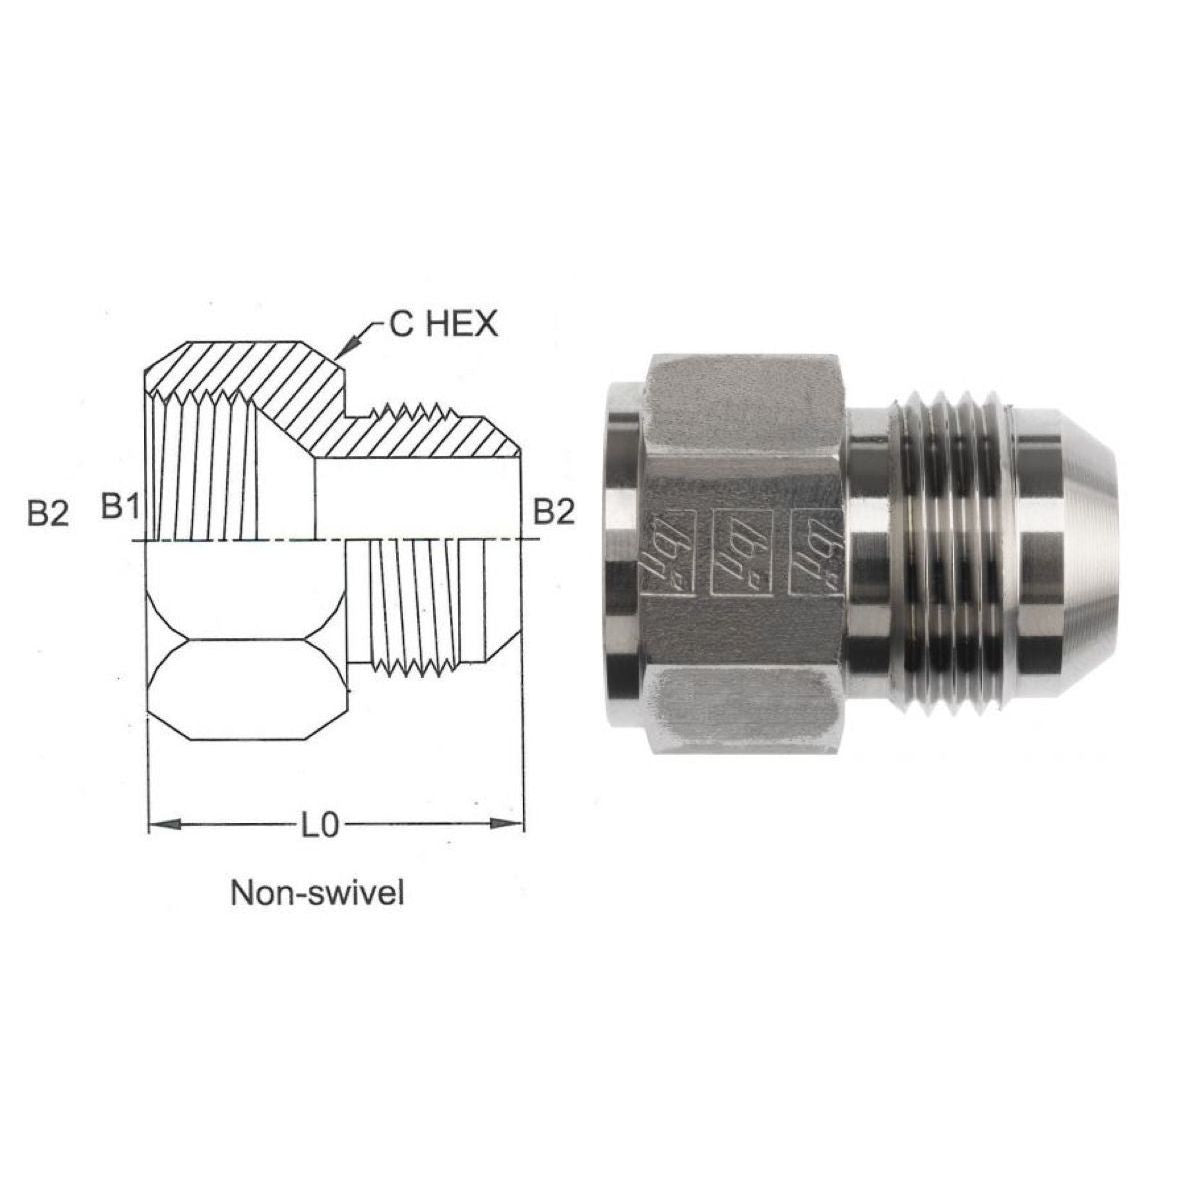 2406-08-06-SS : OneHydraulics  Straight Reducer, Non-Swivel, Straight, 0.5 (1/2") Female JIC x 0.375 (3/8") Male, Stainless Steel